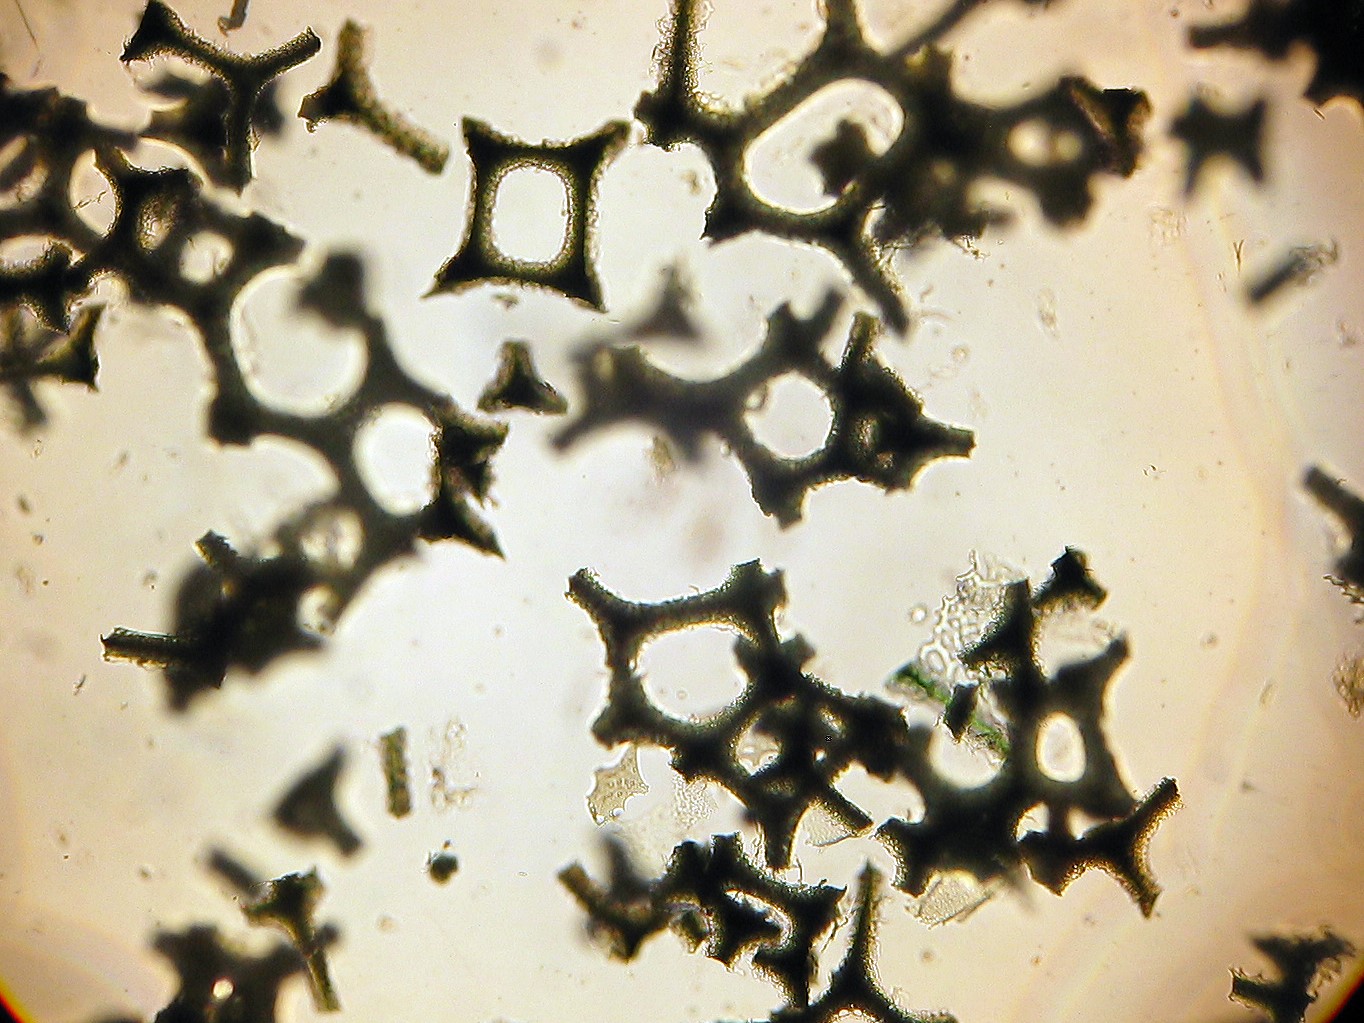 Image of floral foam fragments under a compound microscope, by Professor John West, University of Melbourne.